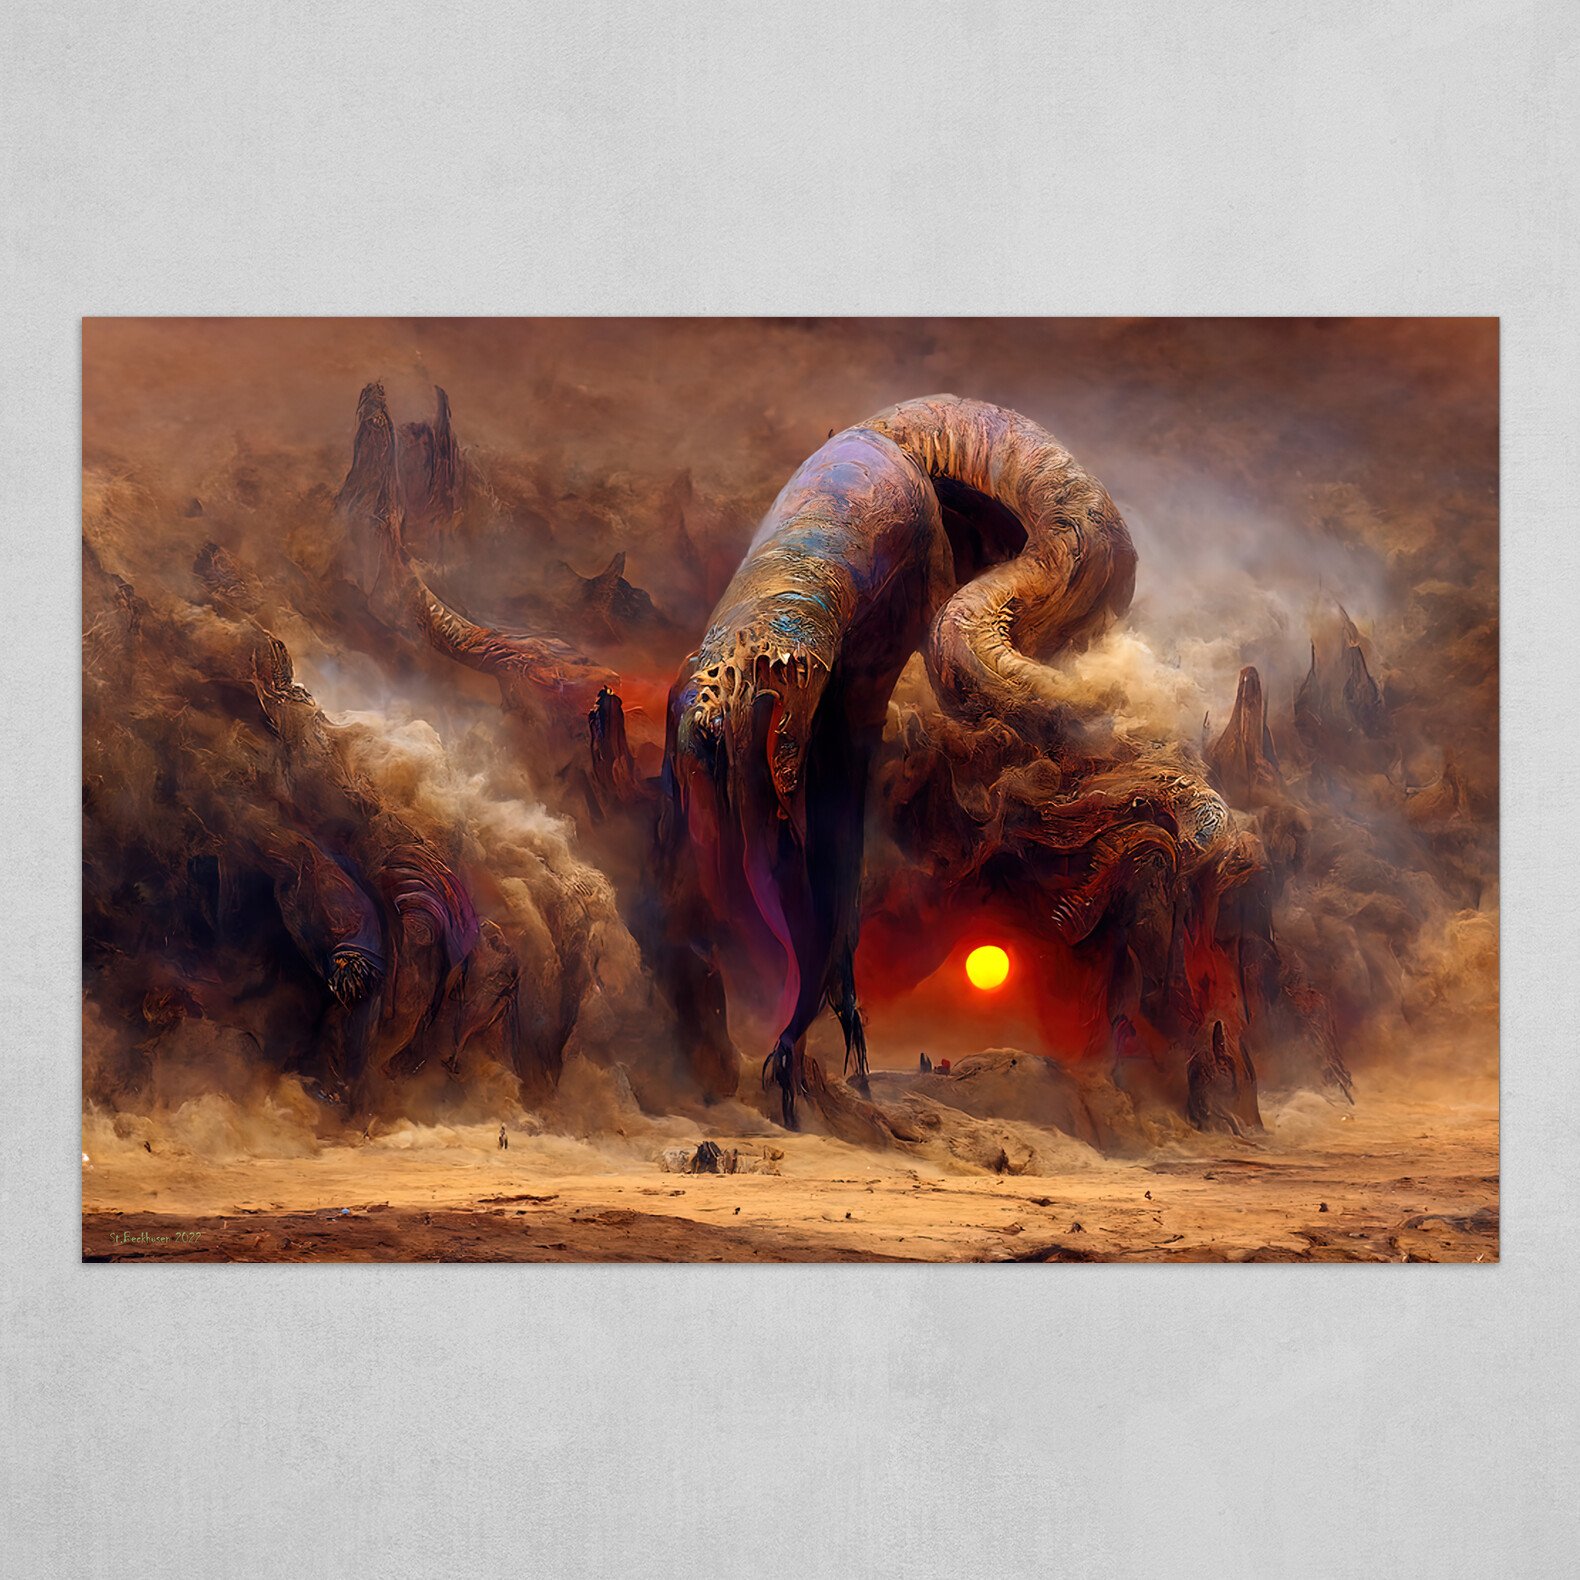 The Prehistoric Dune - Sandworm Entities and their Masters 3.13